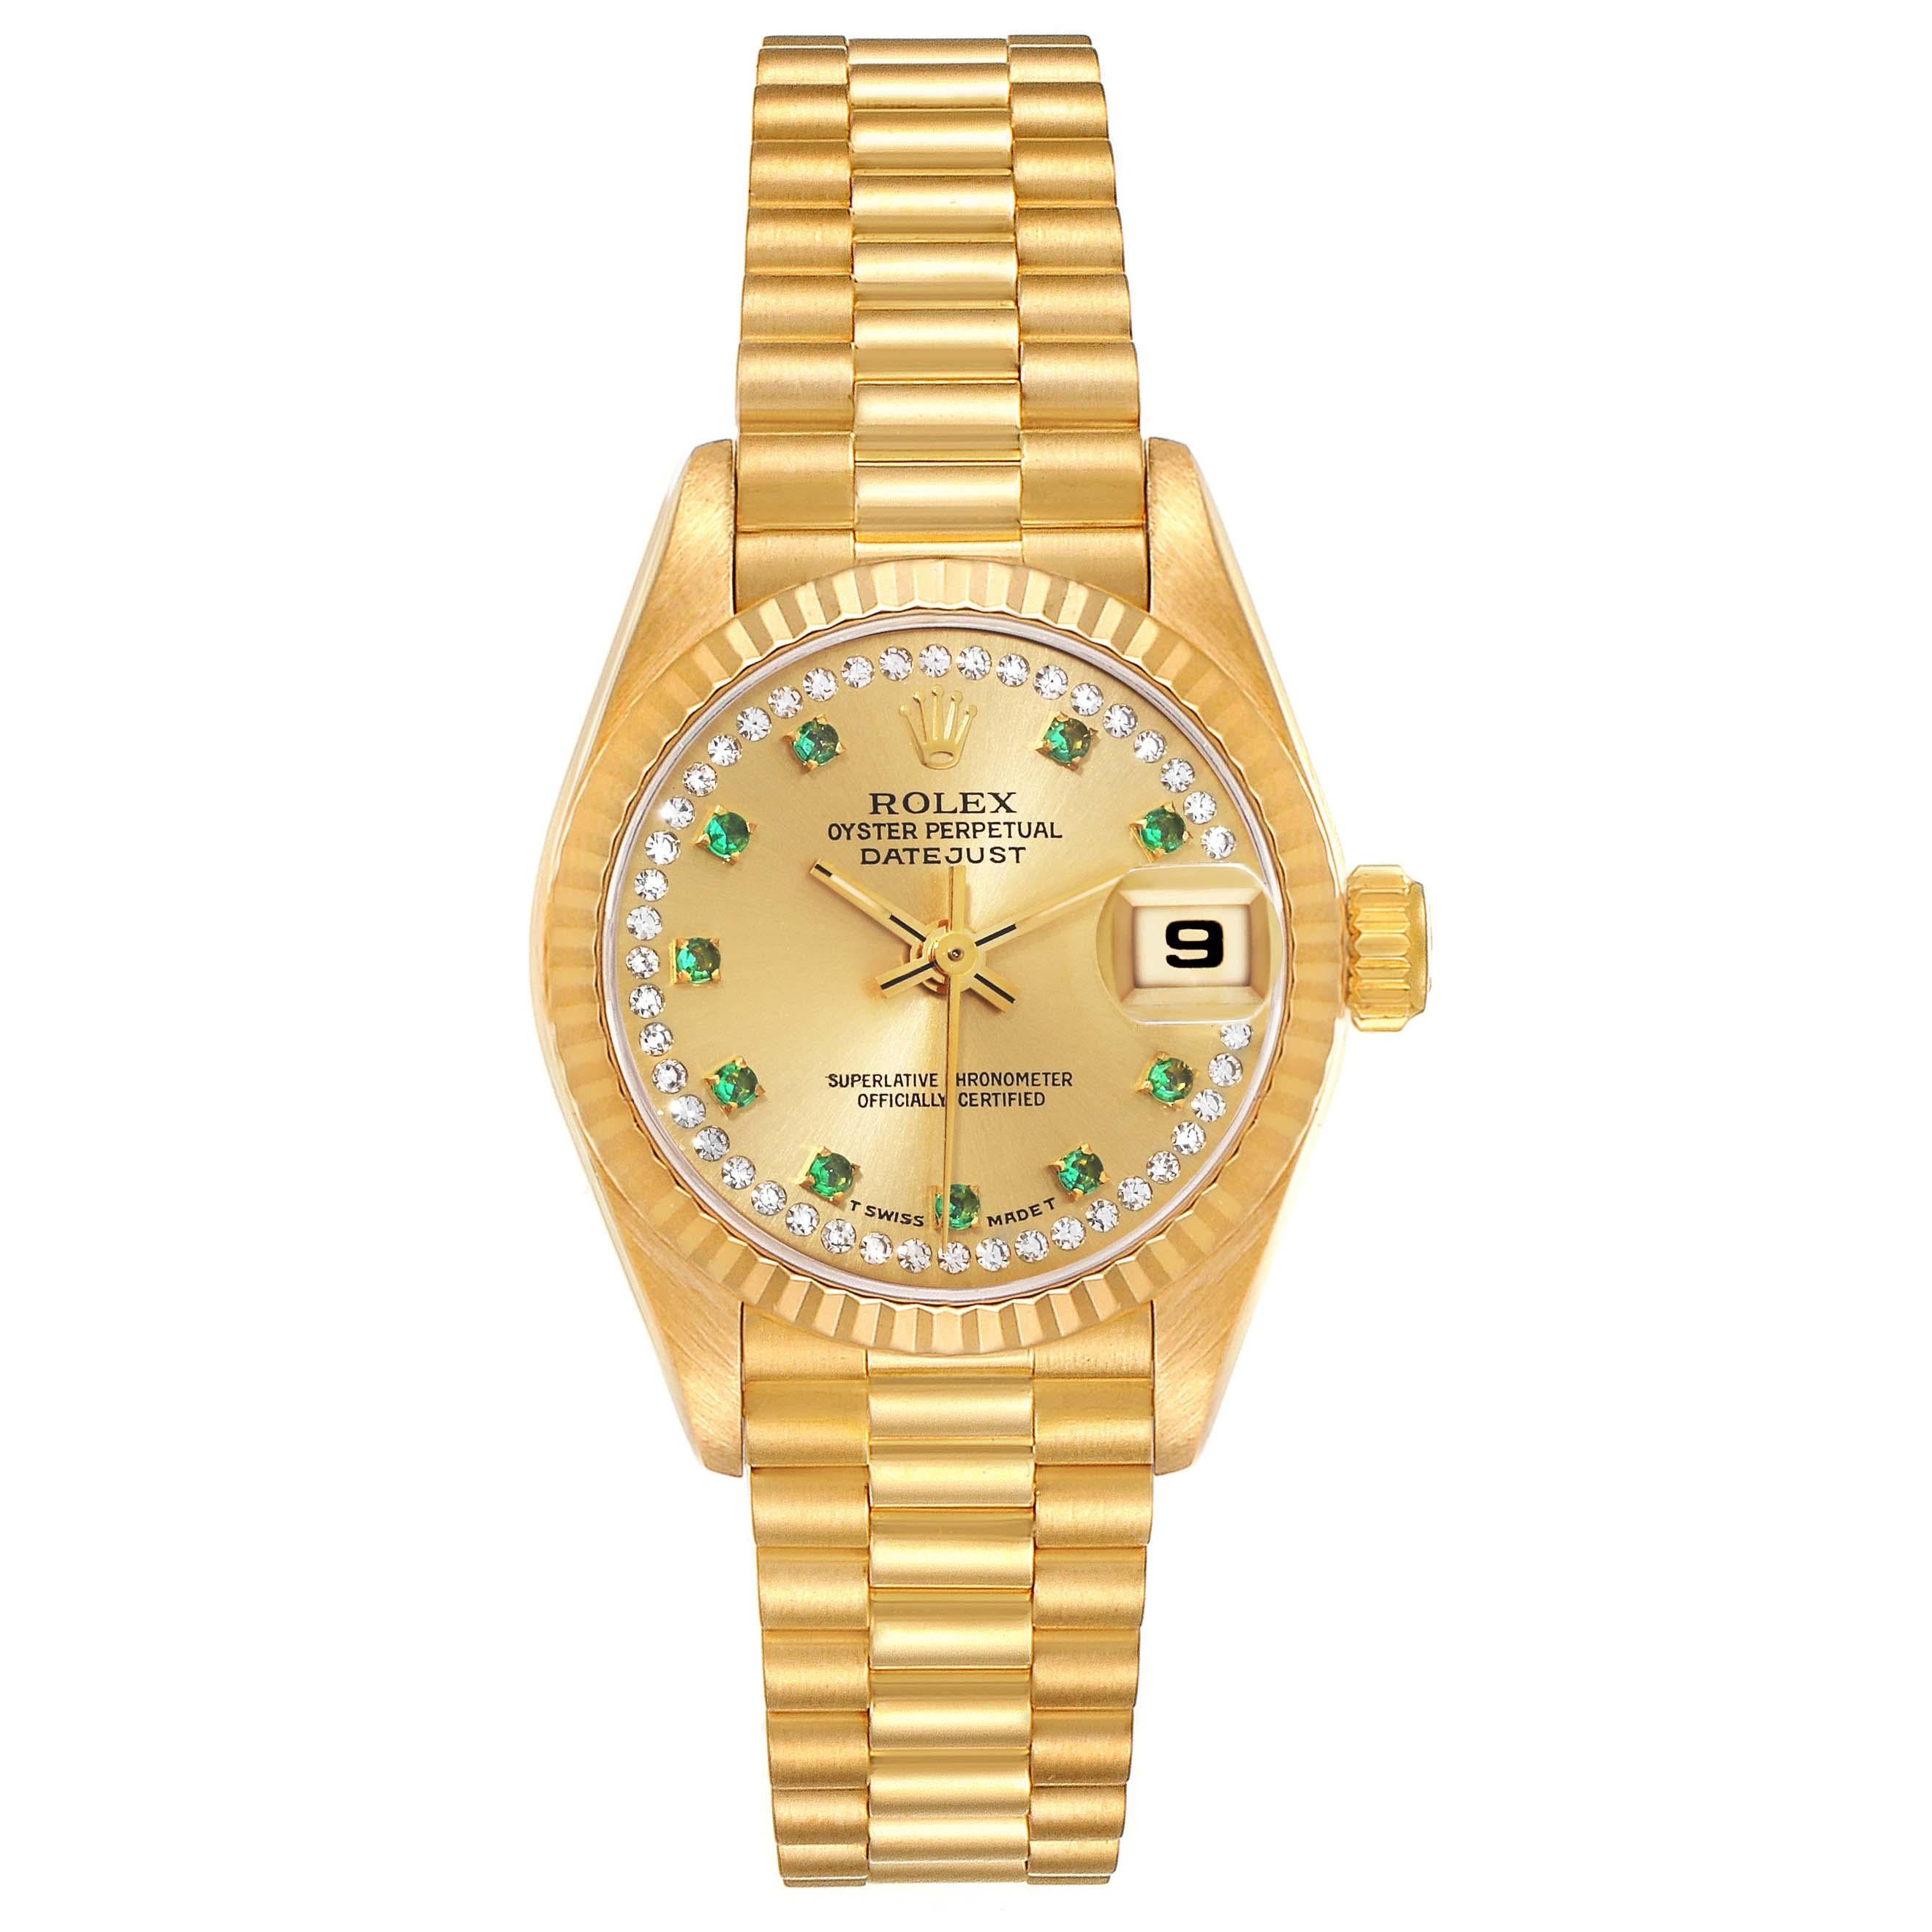 Rolex President Datejust Yellow Gold String Diamond Emerald Ladies Watch 69178. Officially certified chronometer automatic self-winding movement. 18k yellow gold oyster case 26.0 mm in diameter. Rolex logo on a crown. 18k yellow gold fluted bezel.